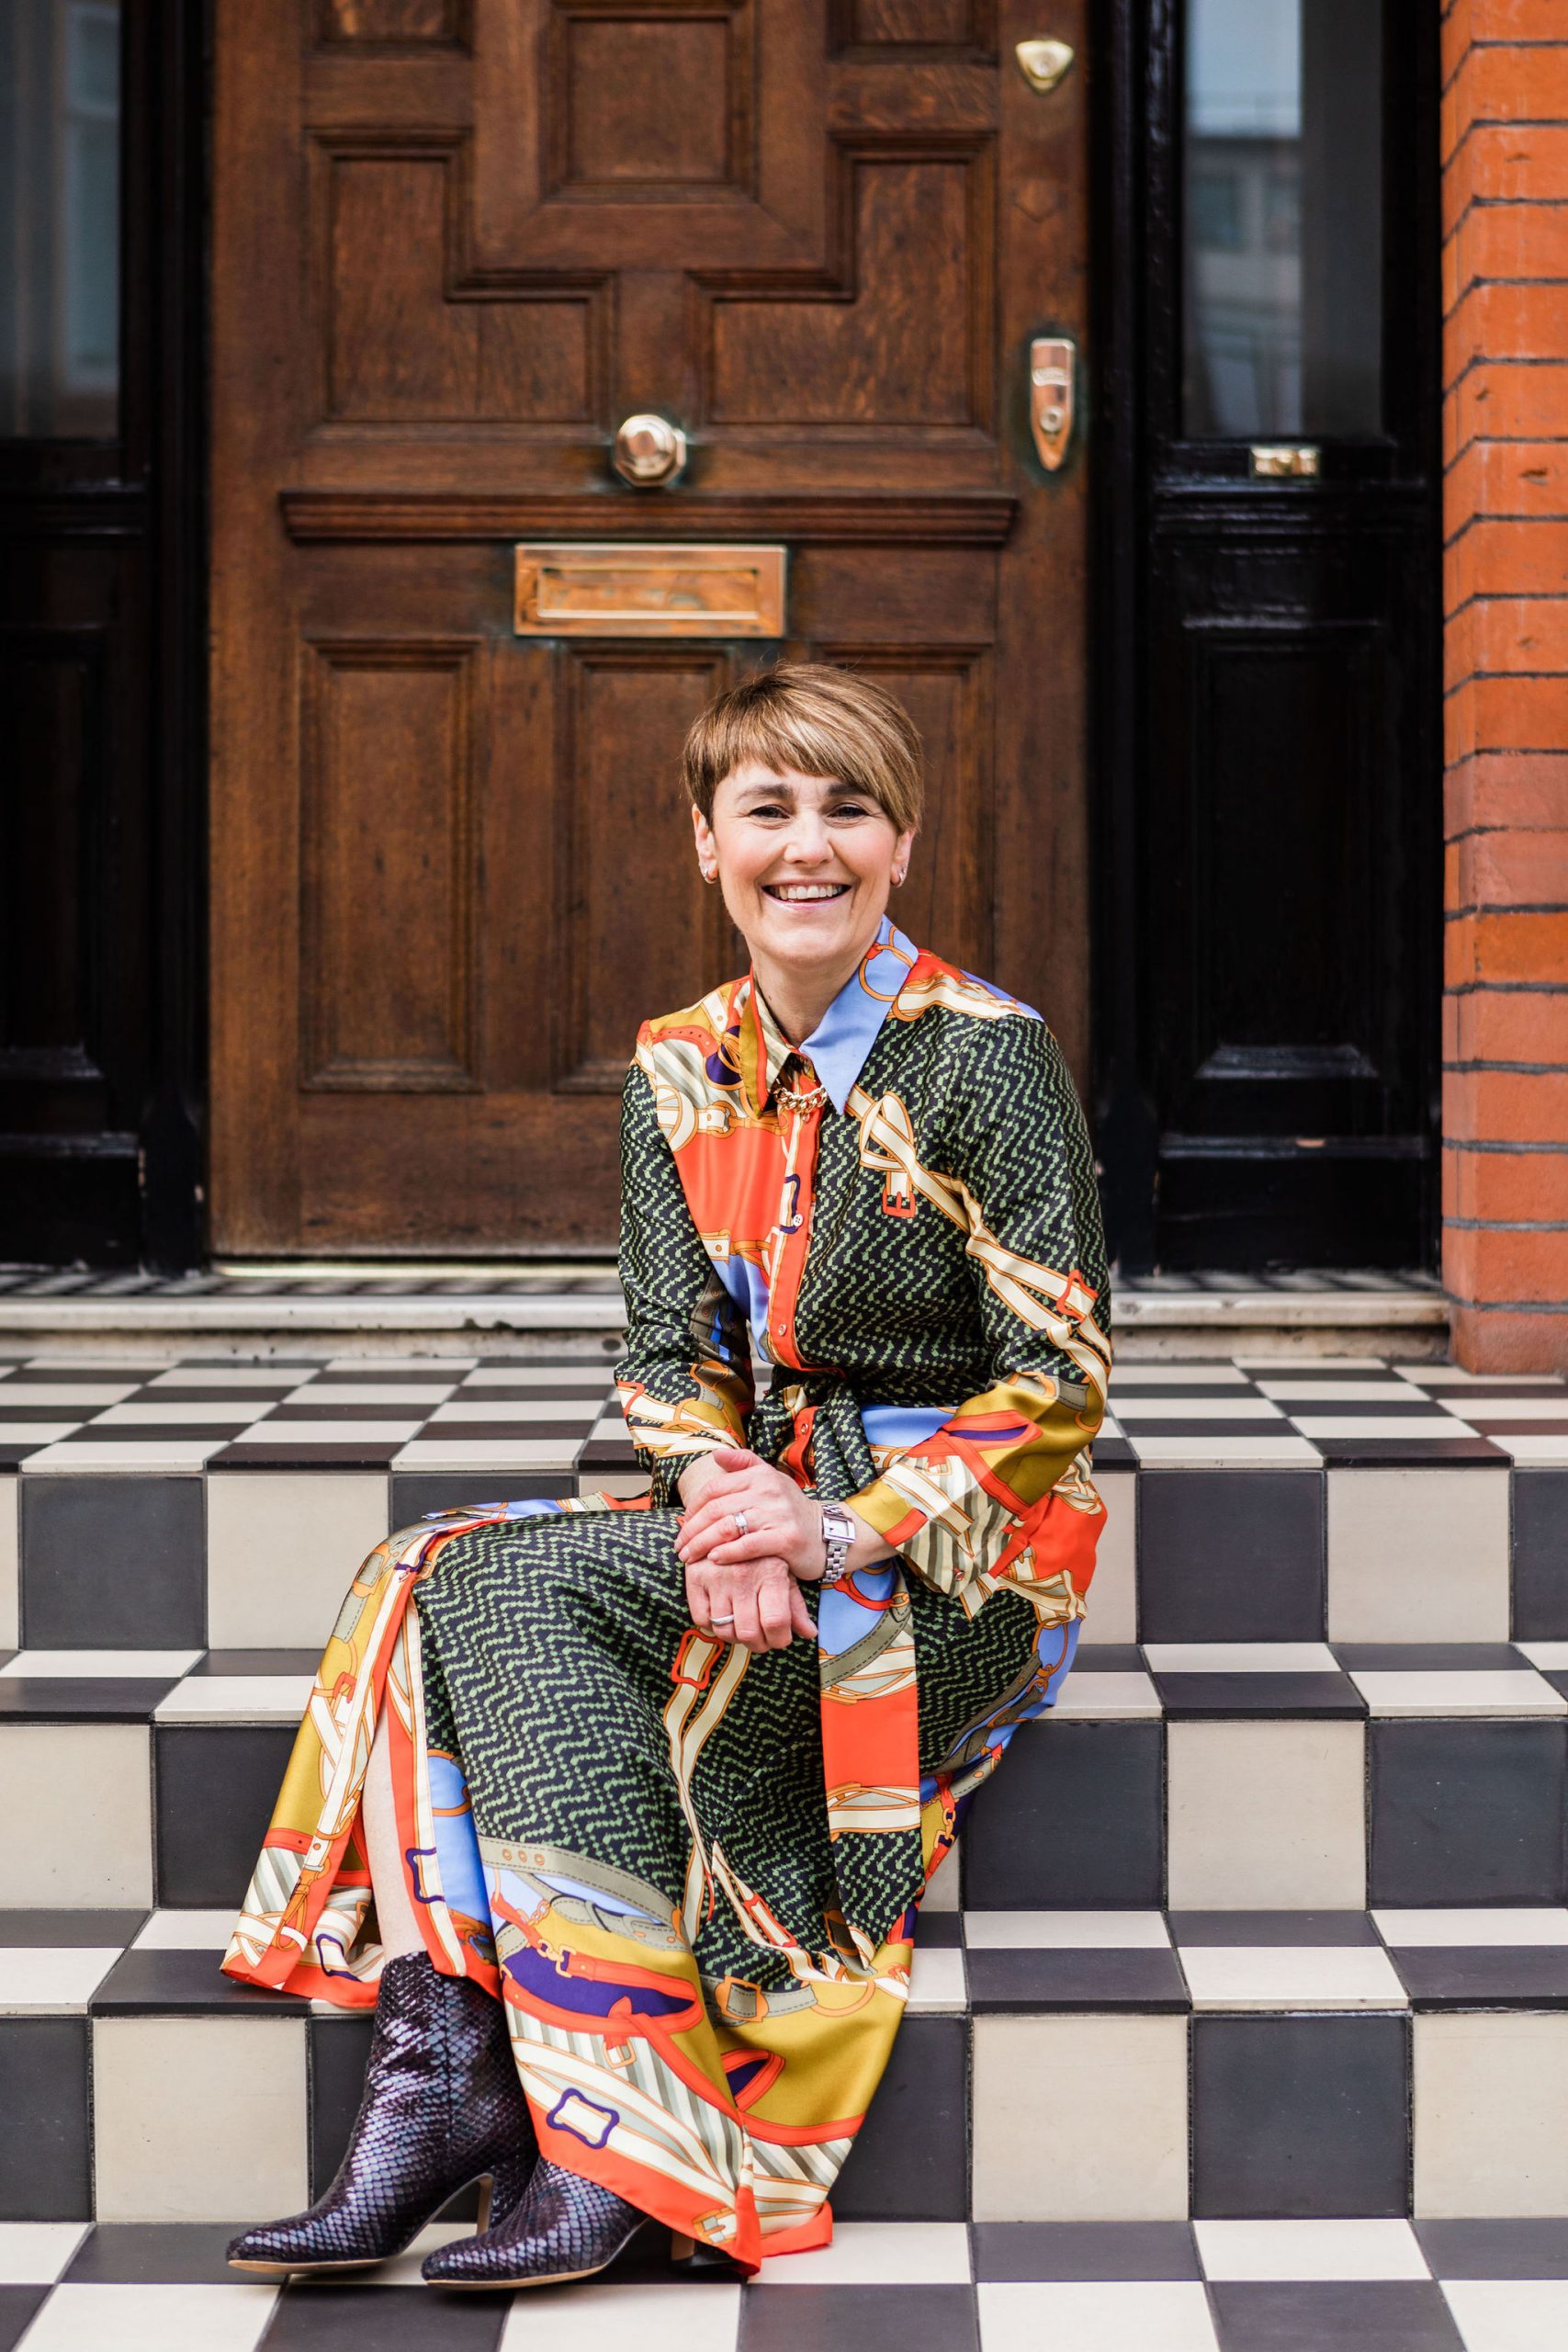 Lisa Talbot, featured on the 'Brand Essentials Podcast,' sits smiling on a checkered doorstep, dressed for success in a vibrant, patterned maxi dress and chic ankle boots, epitomizing how a wardrobe can shape personal brand and confidence in business.